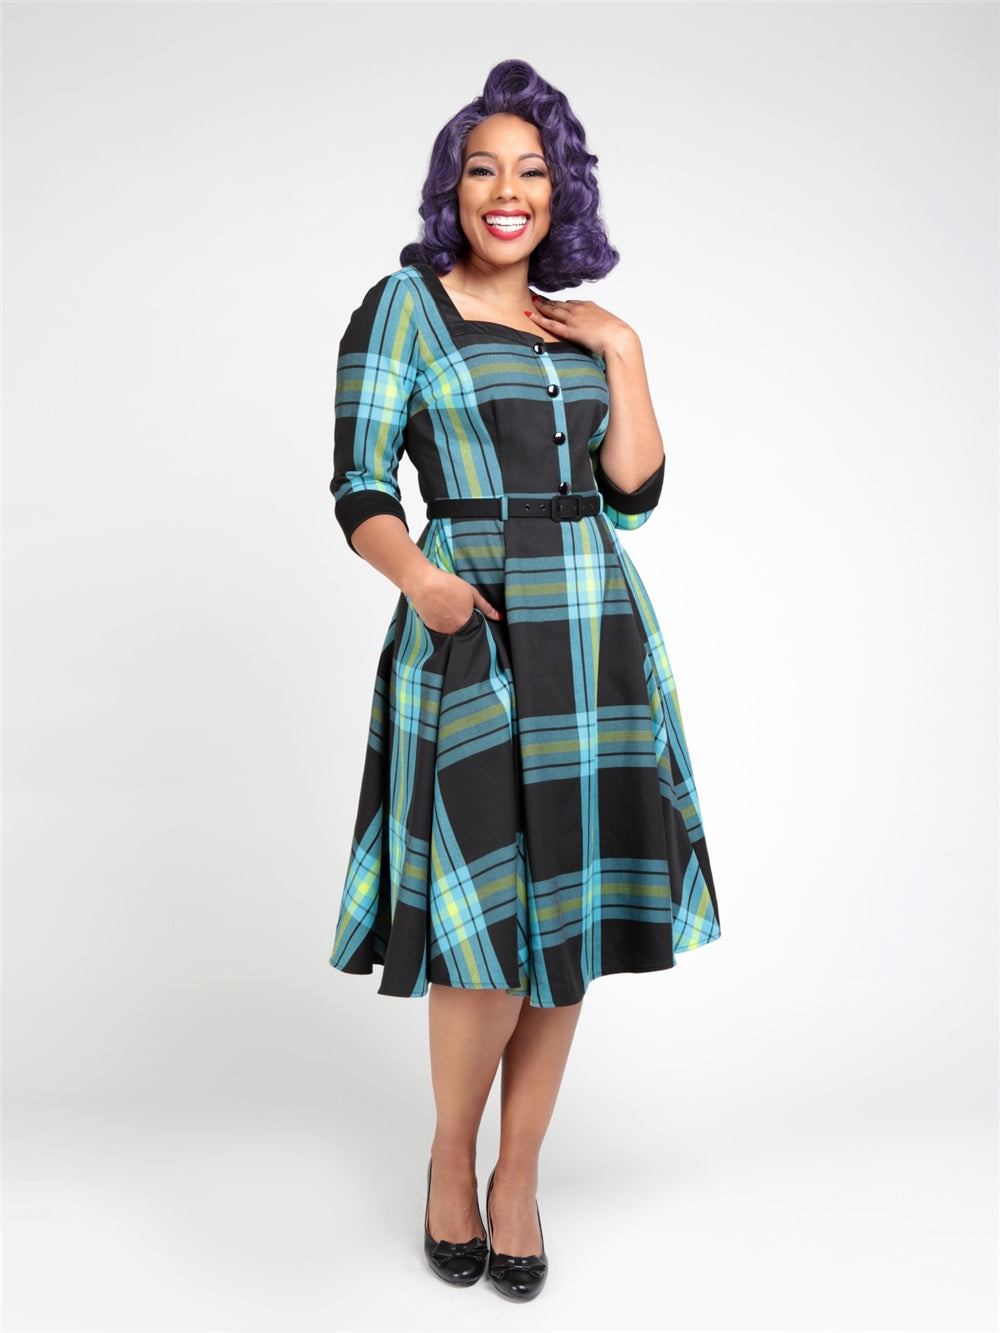 Collectif Linette Evening Check Swing Dress retro vintage 40s 50s tartan plaid pinup pin-up dress Suzie's Bombshell Boutique